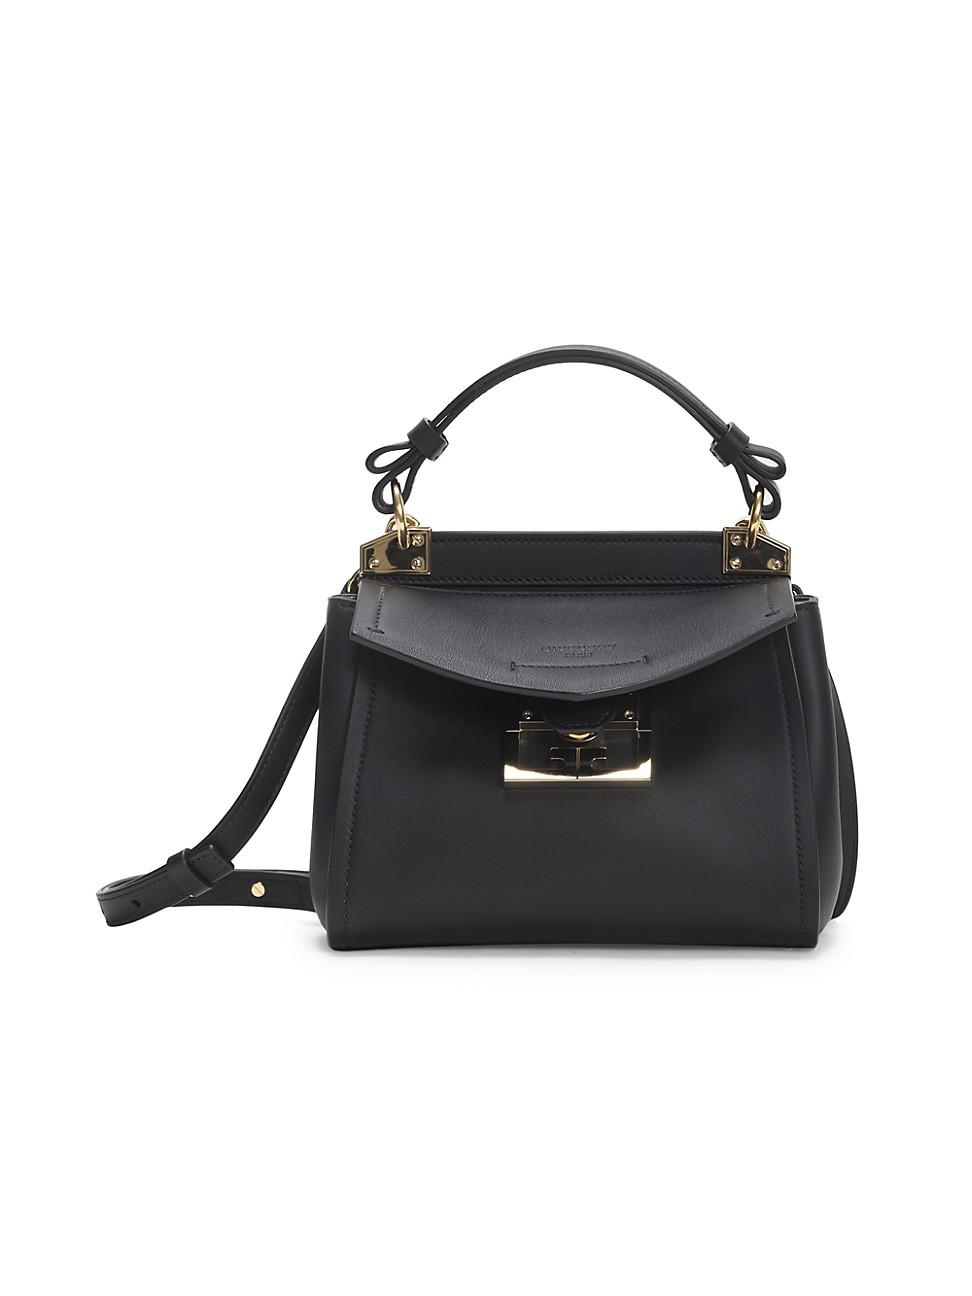 Givenchy Mini Mystic Leather Top Handle Bag in Black | Lyst